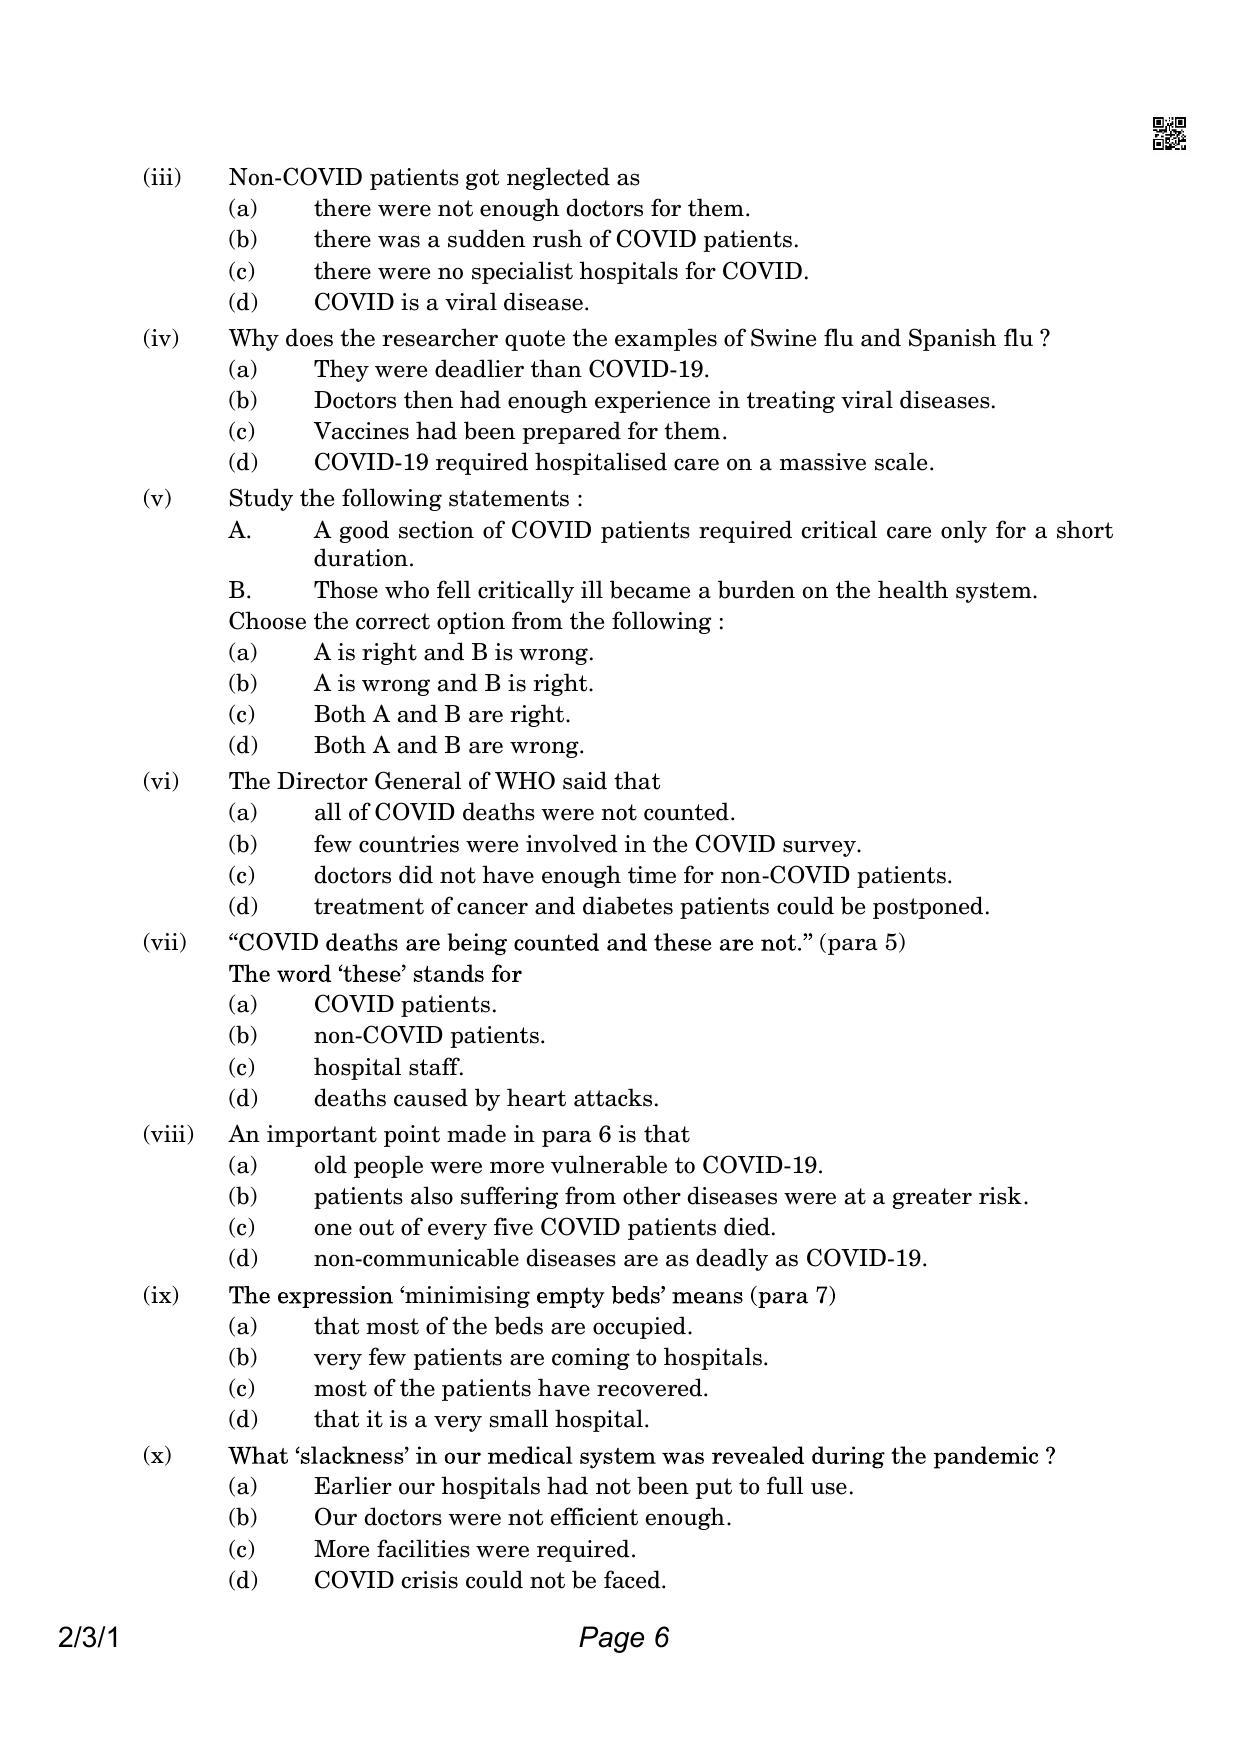 CBSE Class 10 QP_184_ENGLISH_LANGUAGE_AND_LITERATURE 2021 Compartment Question Paper - Page 6